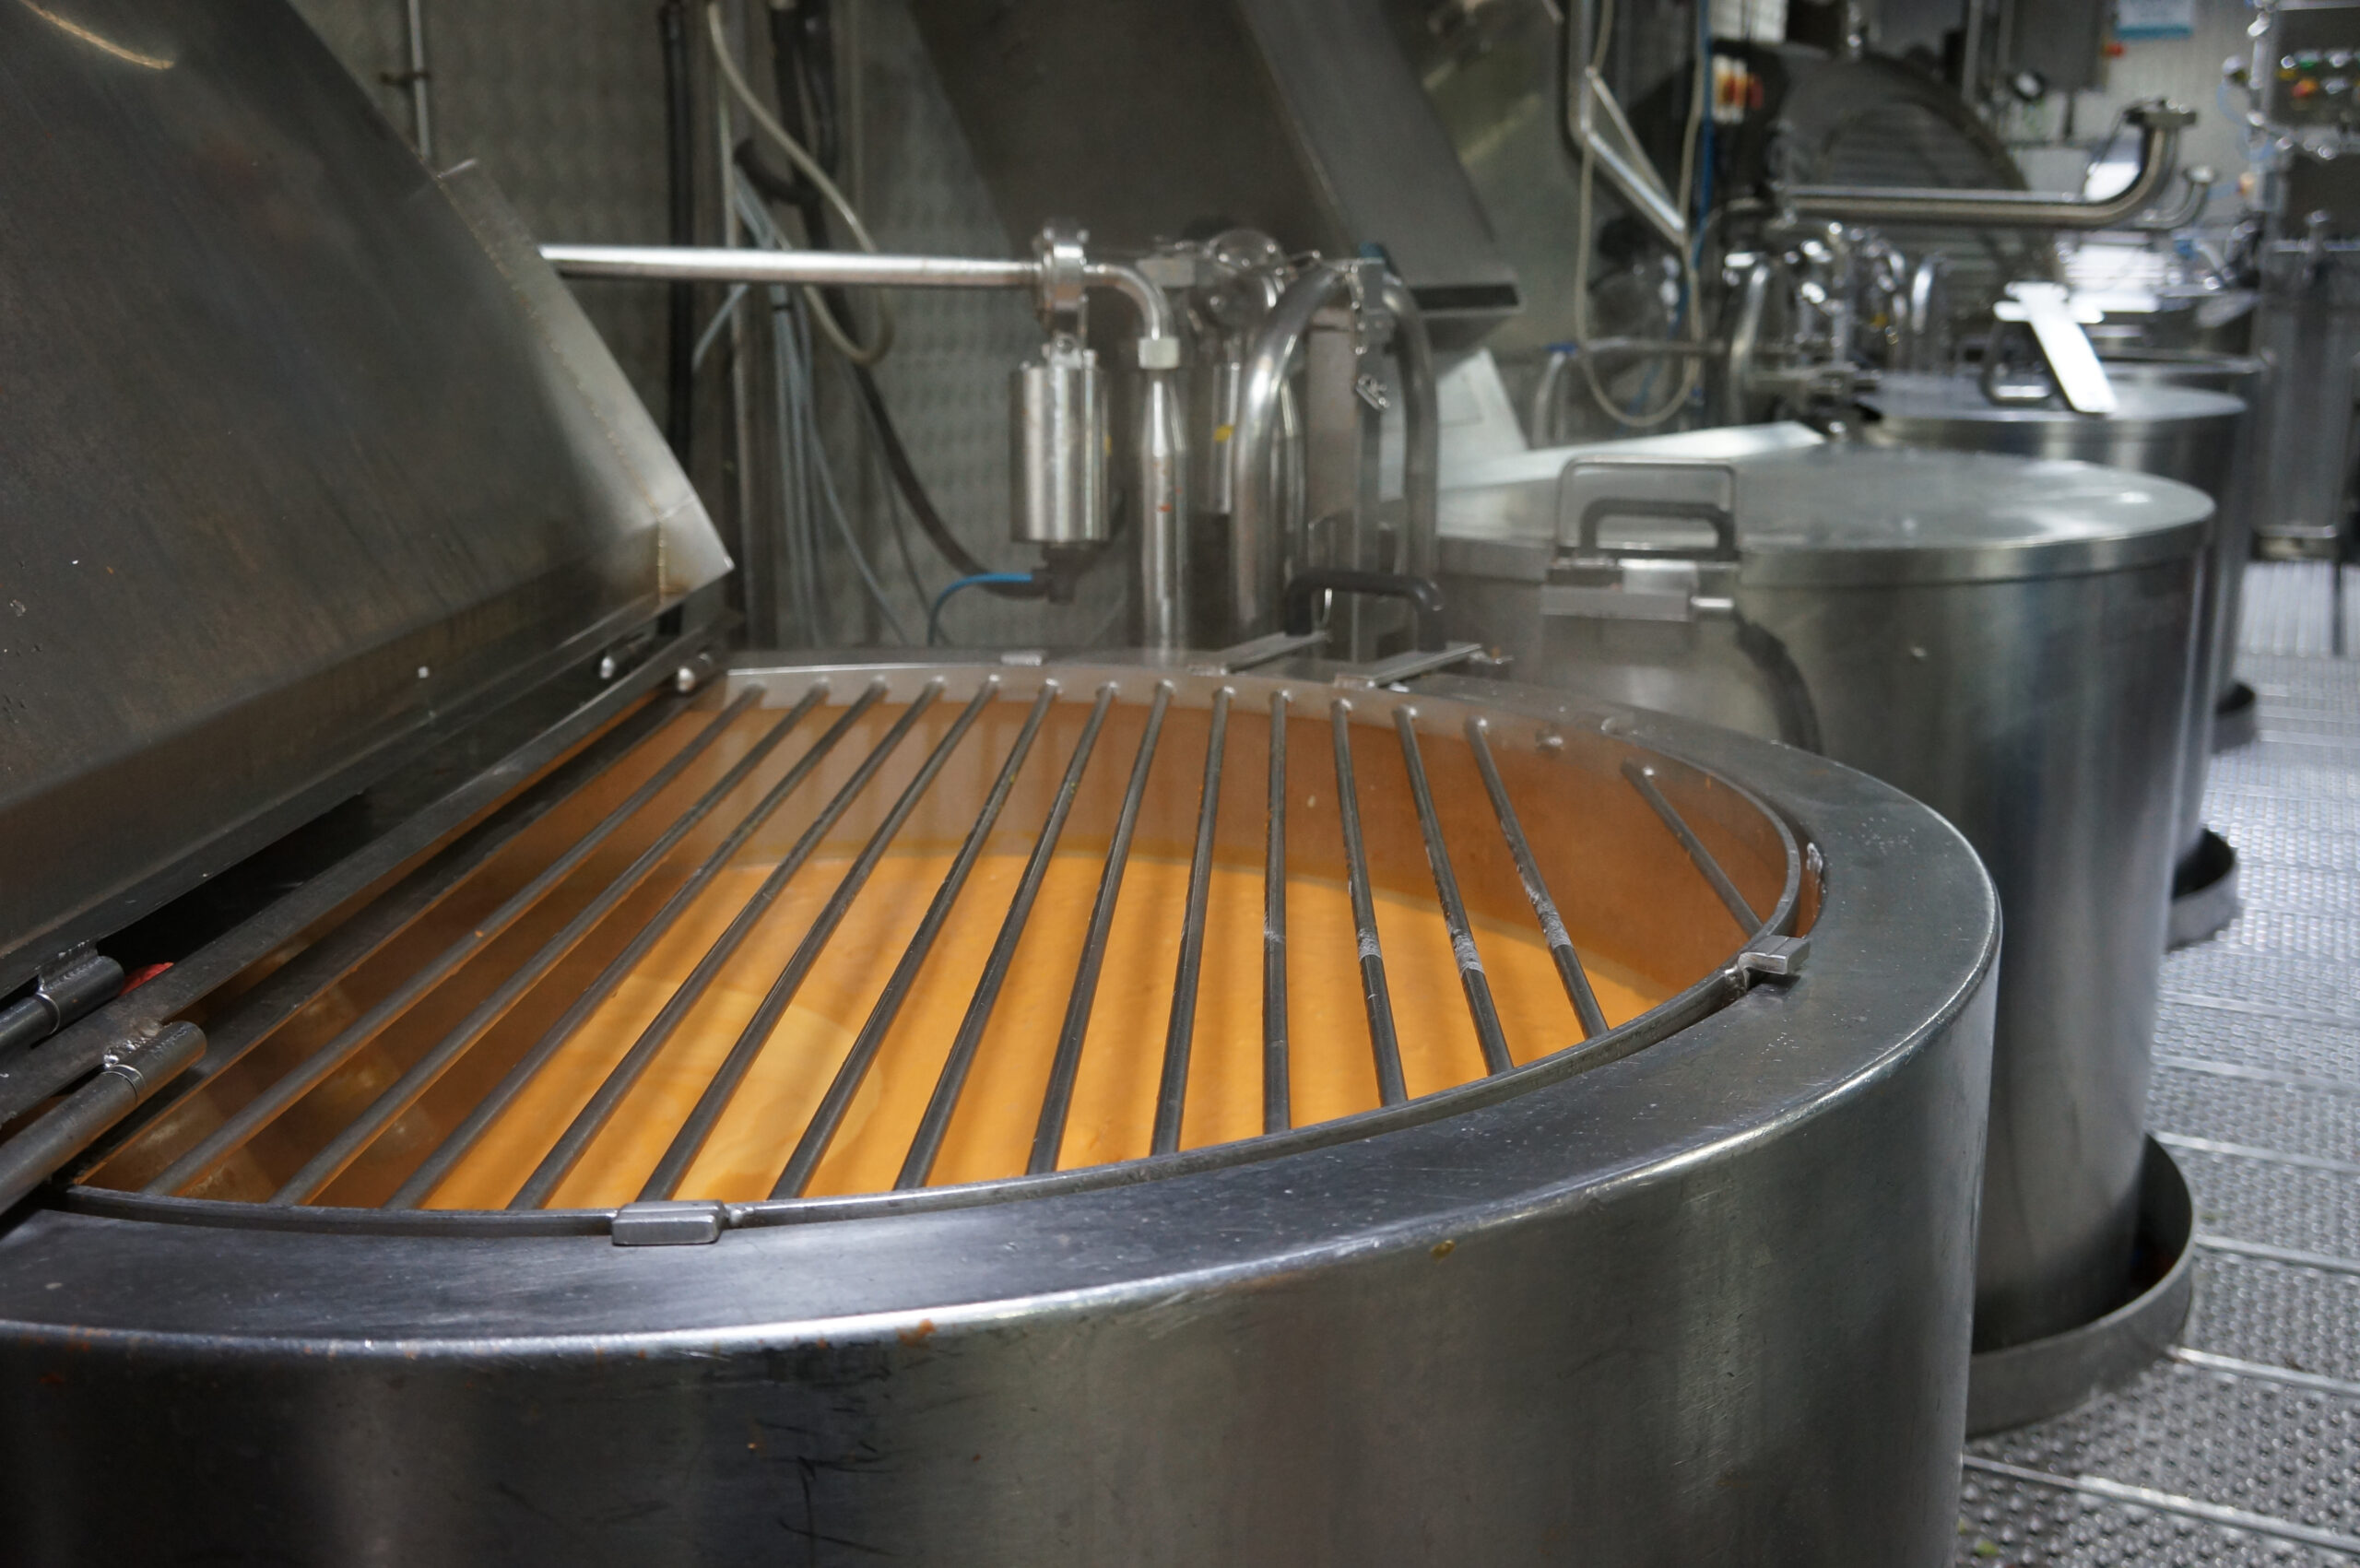 Soup in a large metal container being cooked.